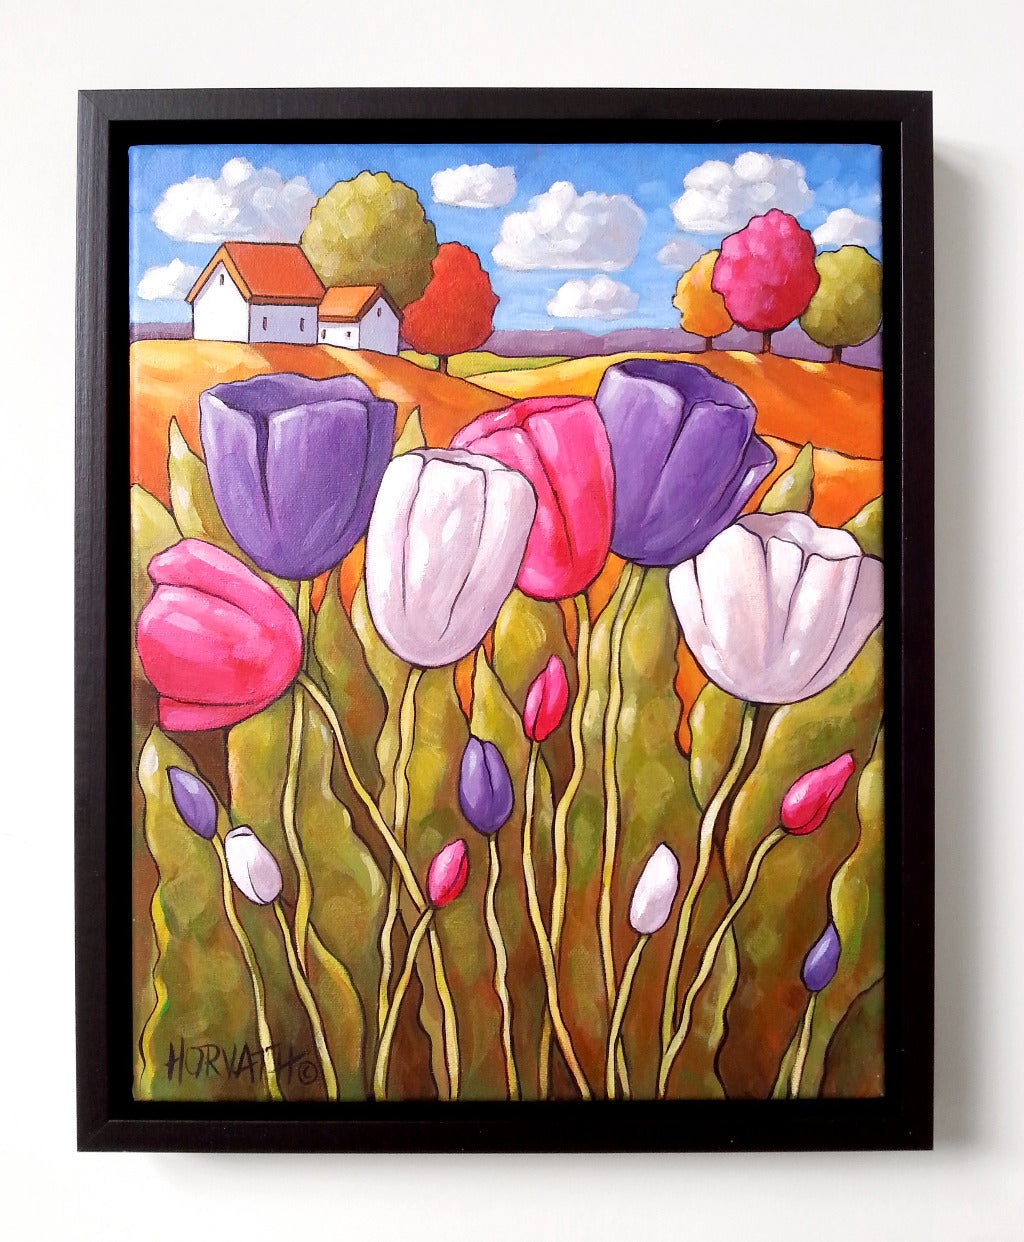 Acrylic Painting Tulip Flower Garden Landscape. Colorful Wall Art 11x14